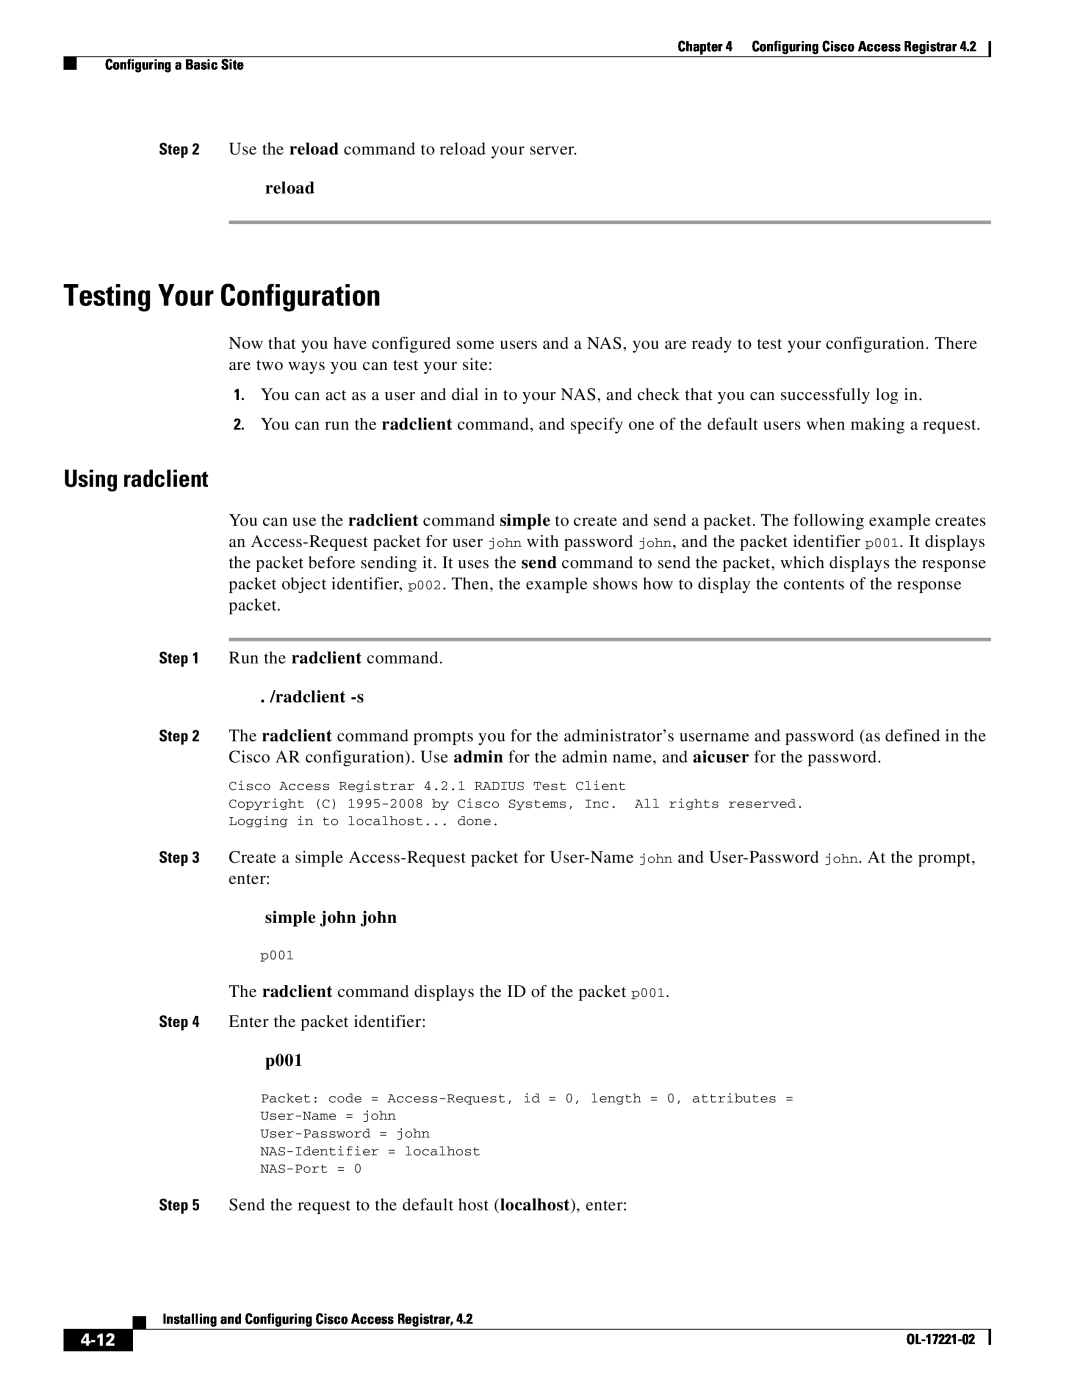 Cisco Systems 4.2 manual Testing Your Configuration, Using radclient, radclient -s, simple john john, p001, 4-12, reload 